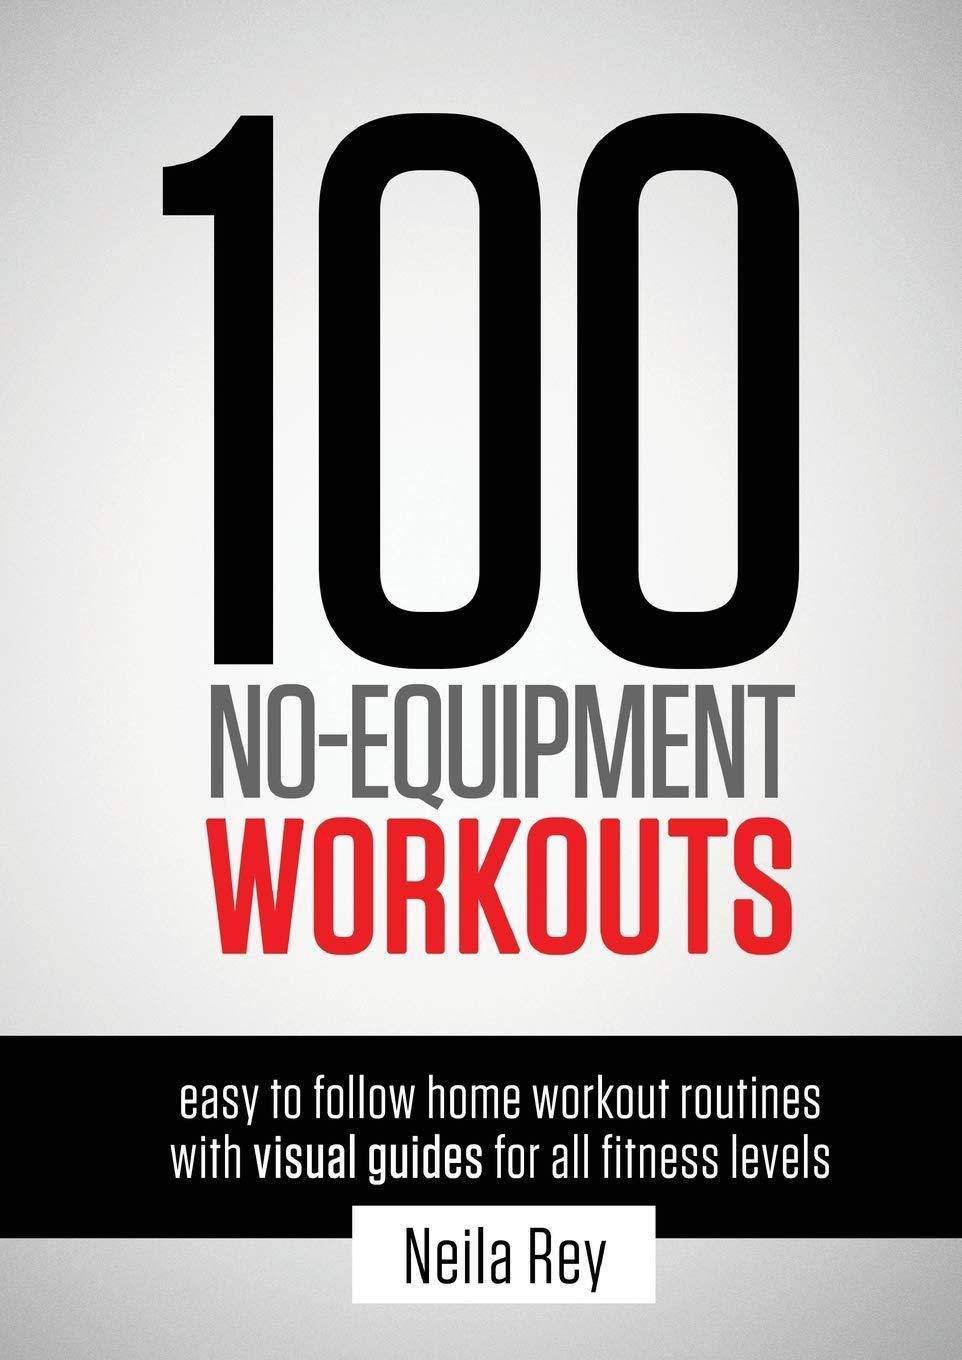 100 No-Equipment Workouts Vol. 1: Fitness Routines you can do an - CA Corrections Bookstore